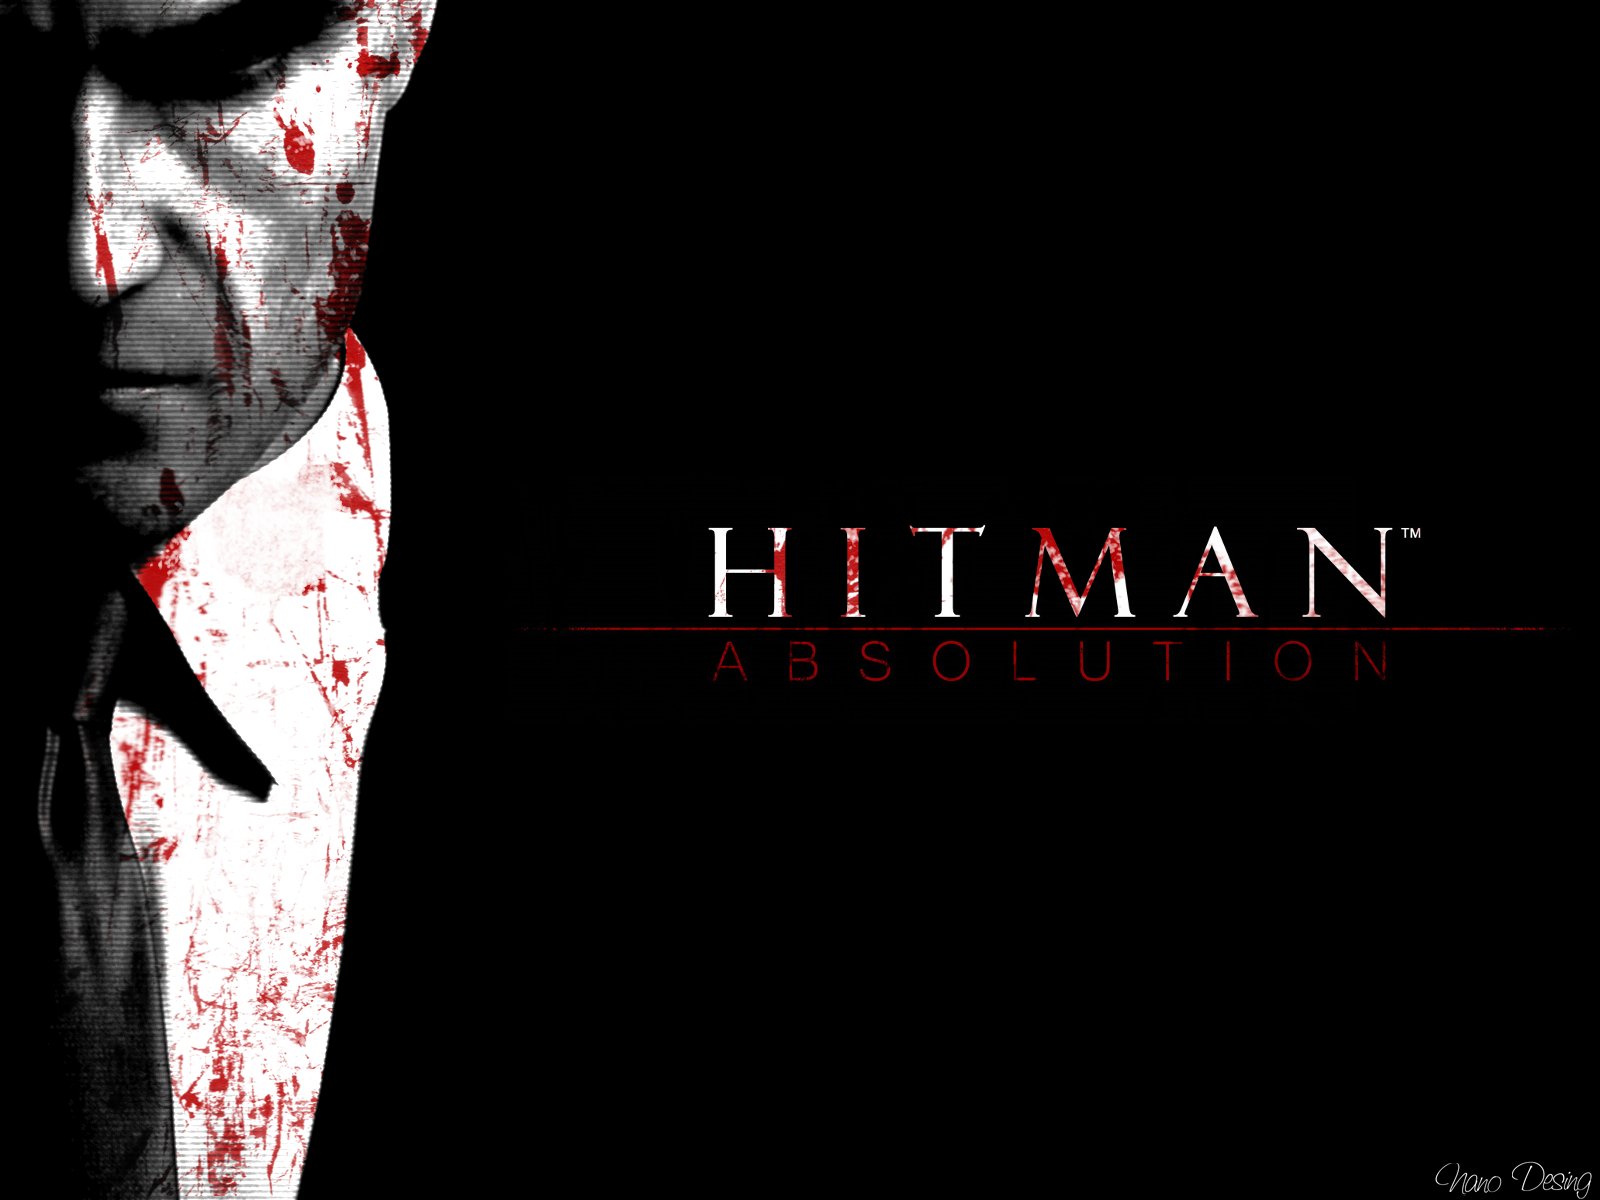 Hitman Absolution Trailer Gaming News And Game Res From